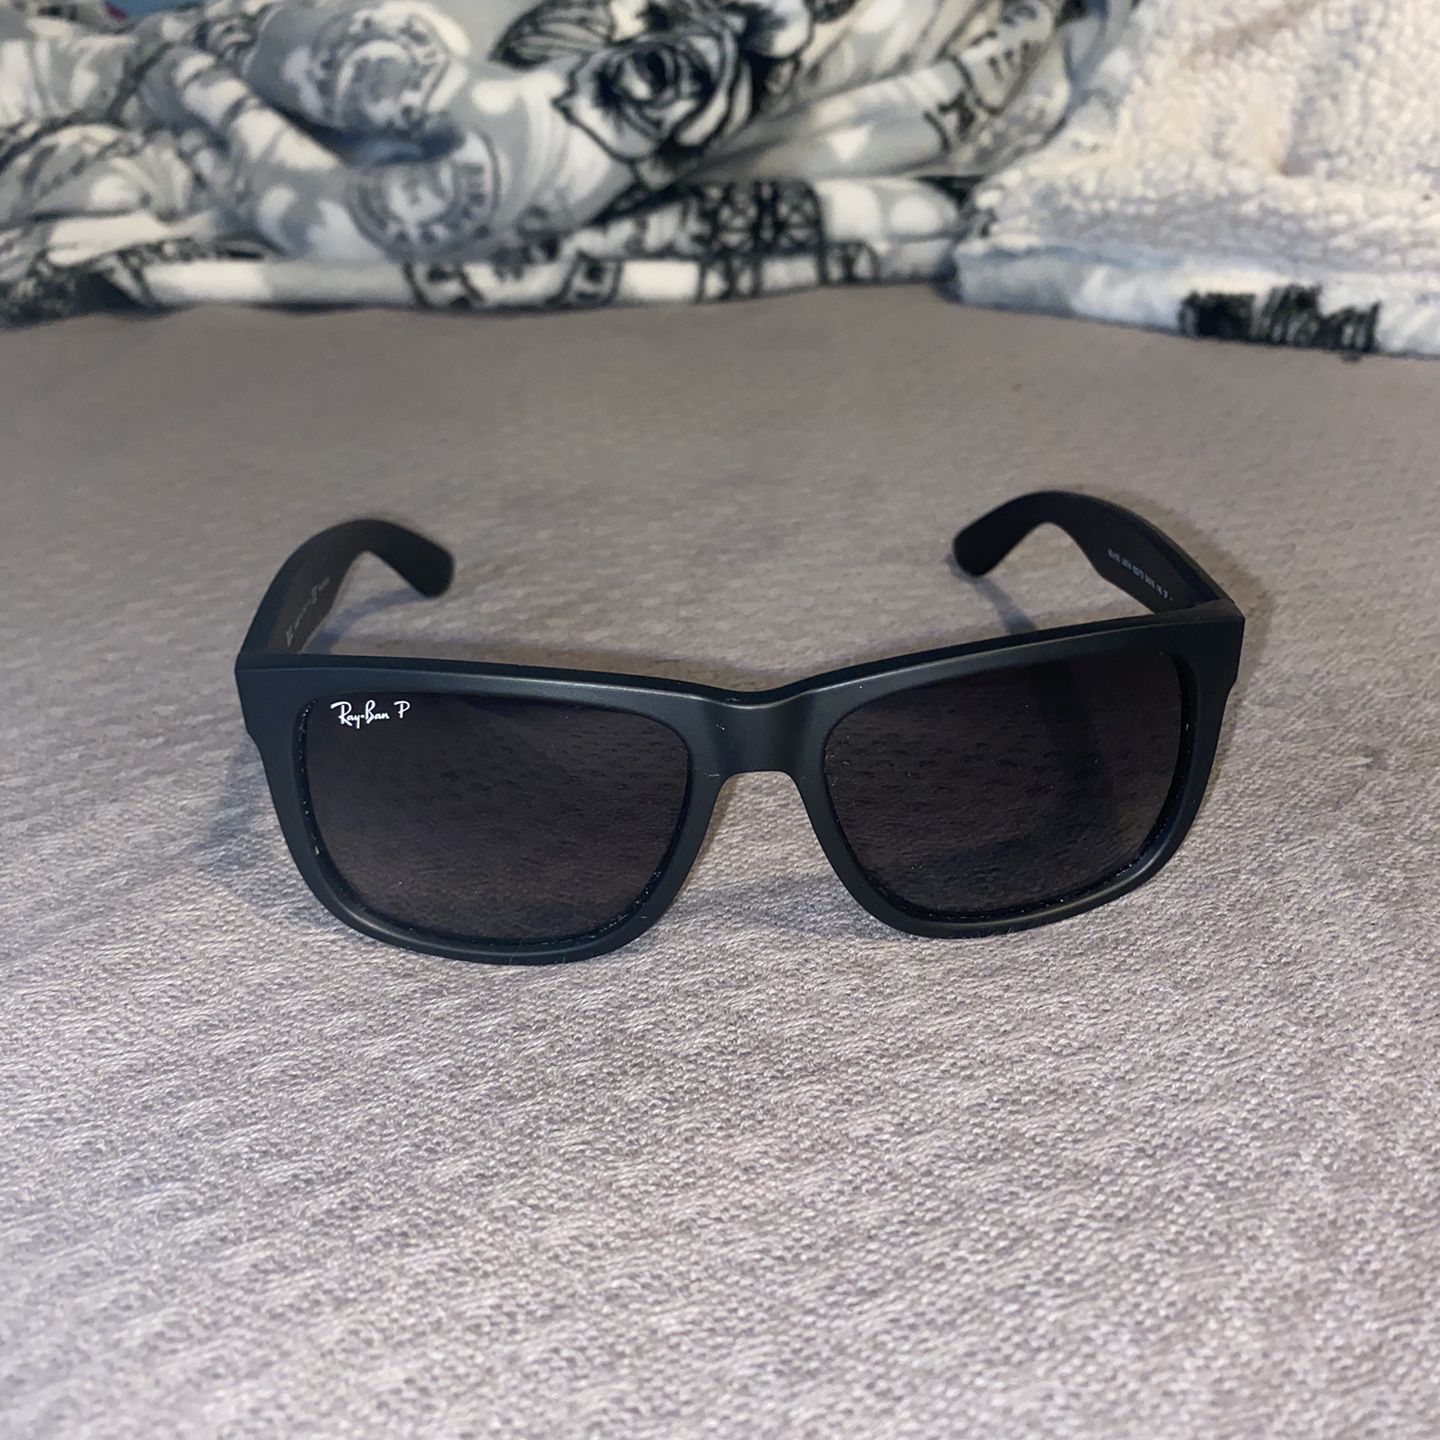 Ray-bans Justin Classic Polarized for Sale in Dallas, TX - OfferUp